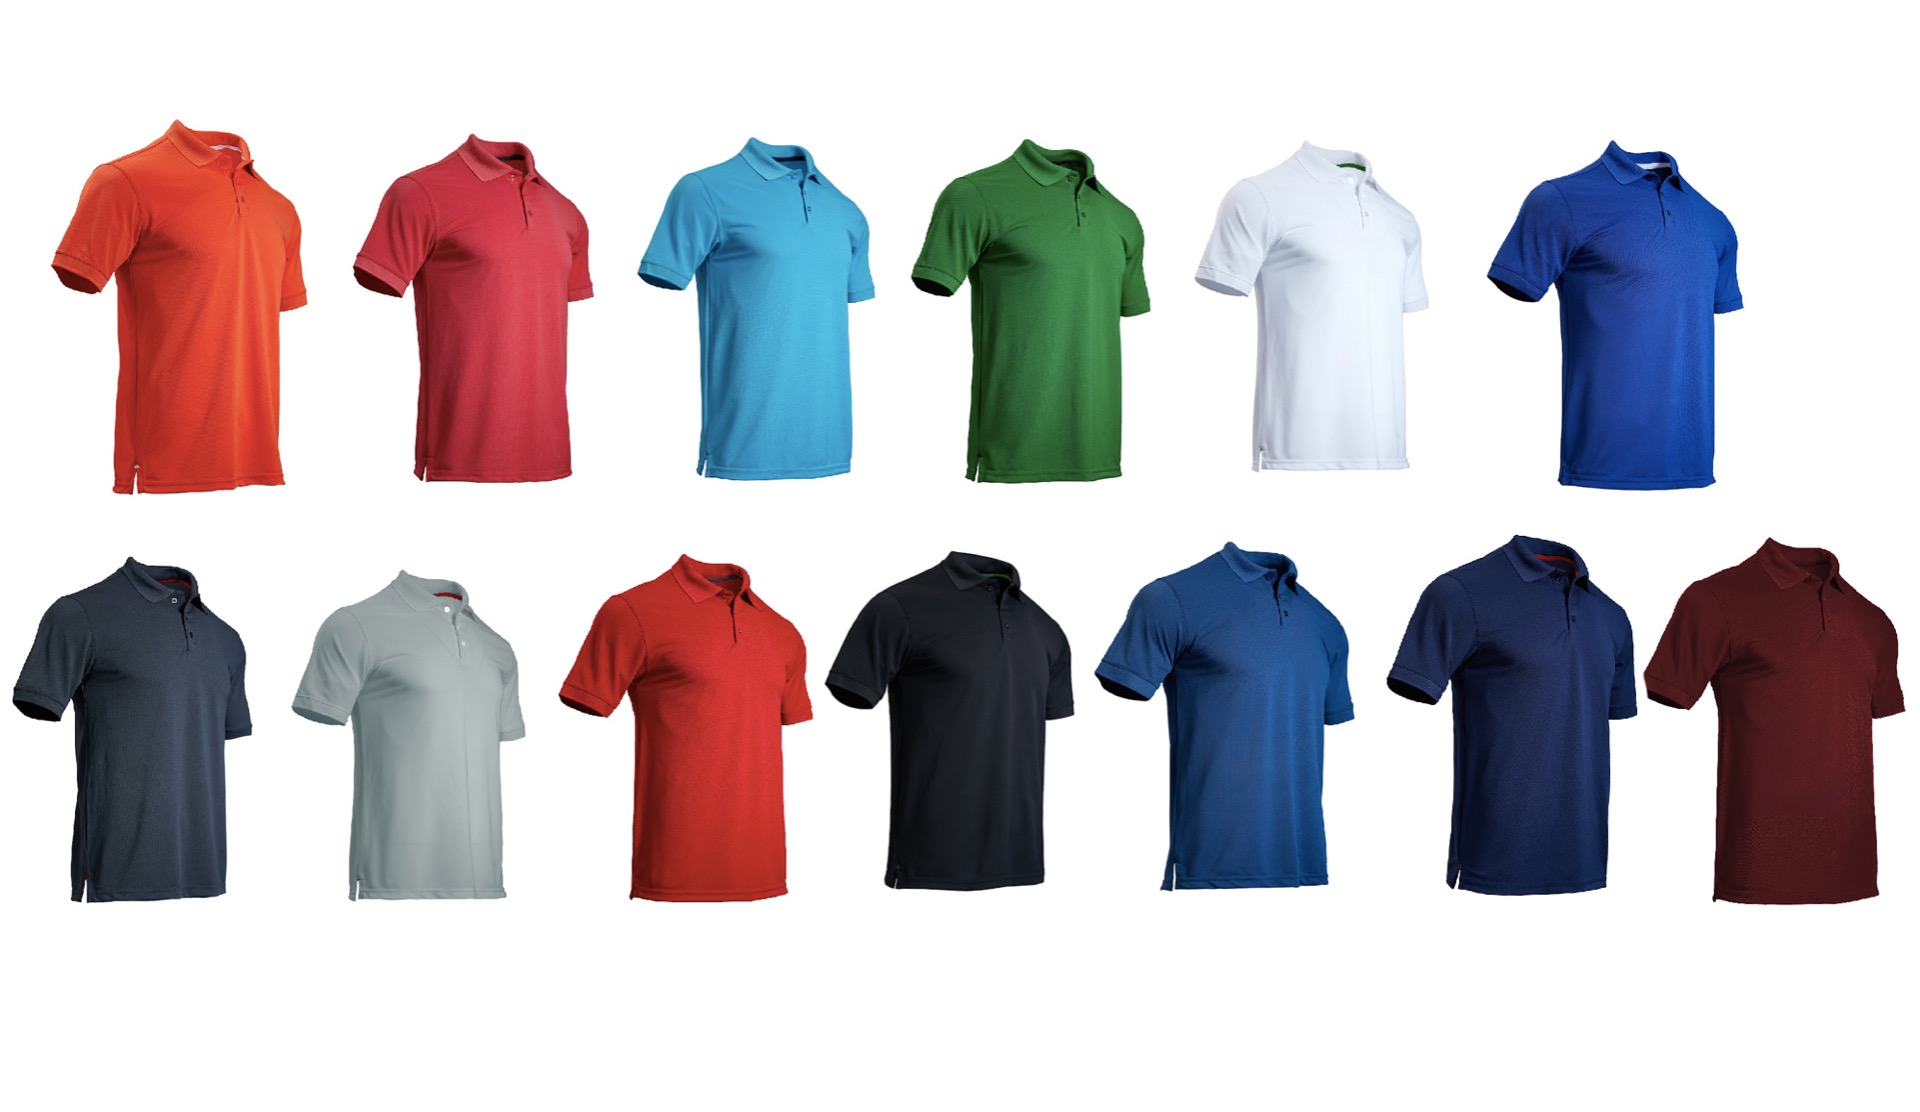 Men's Fashion Short-Sleeve Polo SHIRTs - Choice Your Color(s)